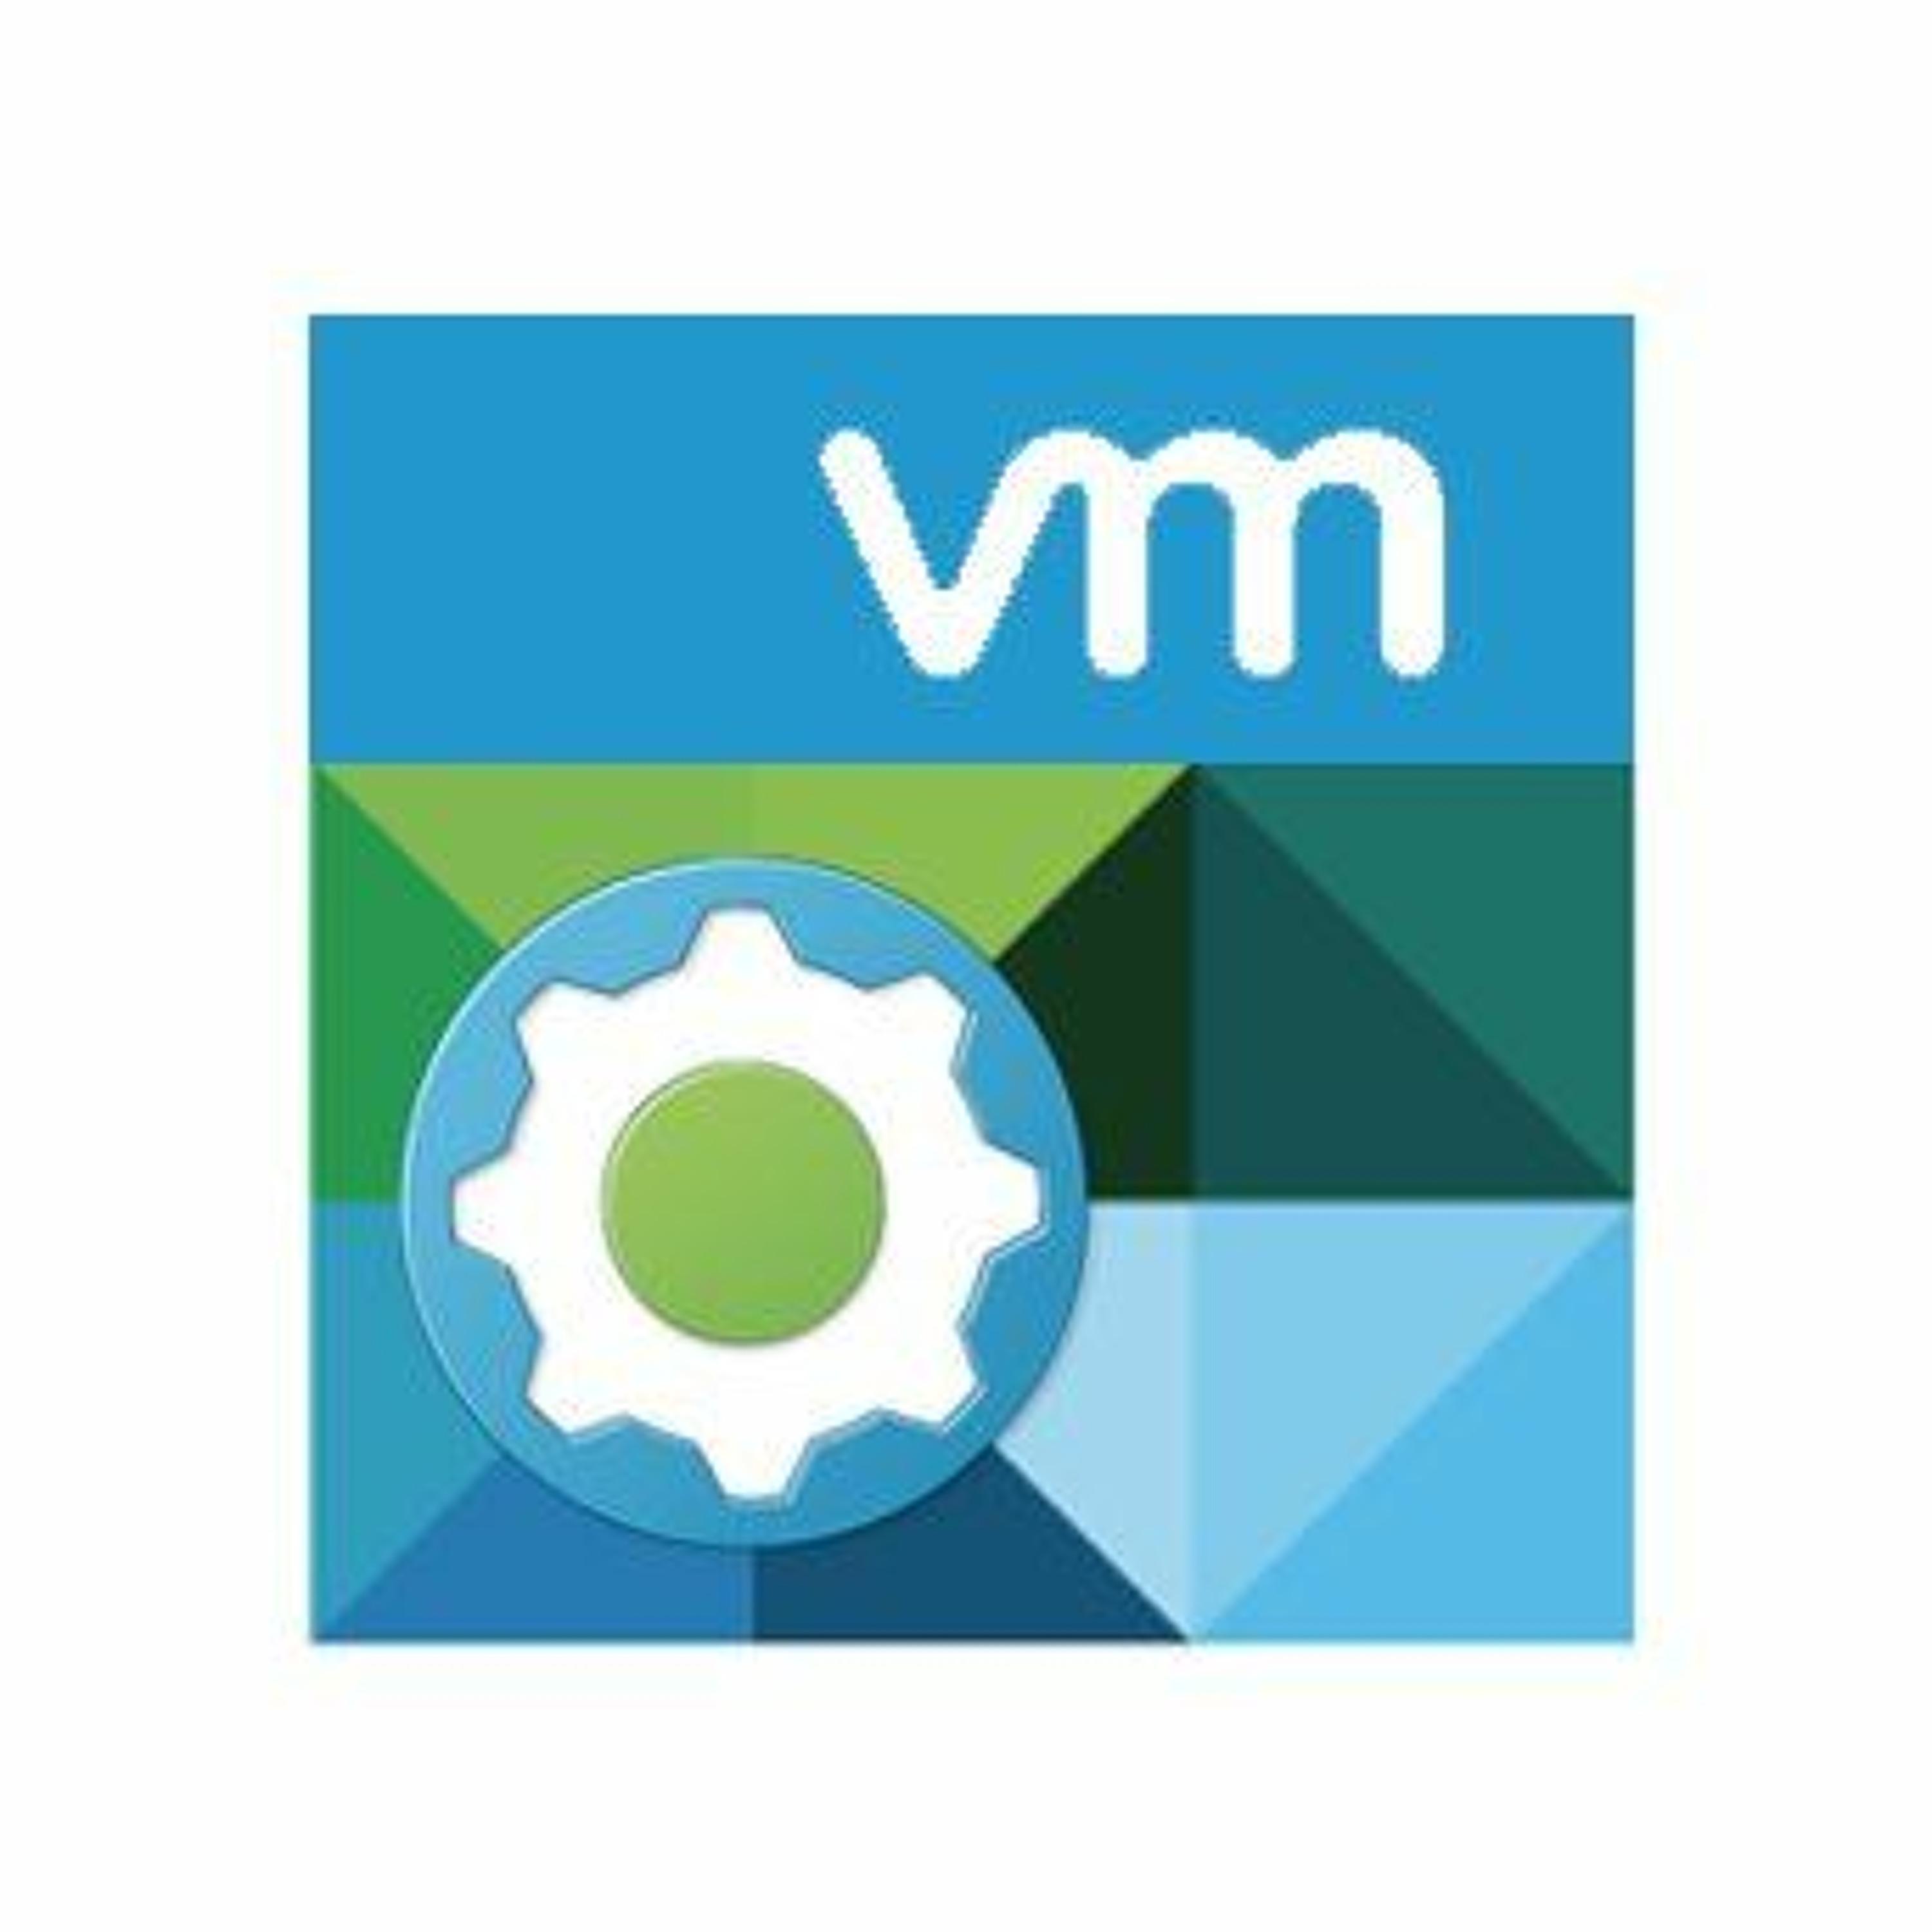 Utilizing Public Cloud Services with VMware Cloud and vRealize Automation